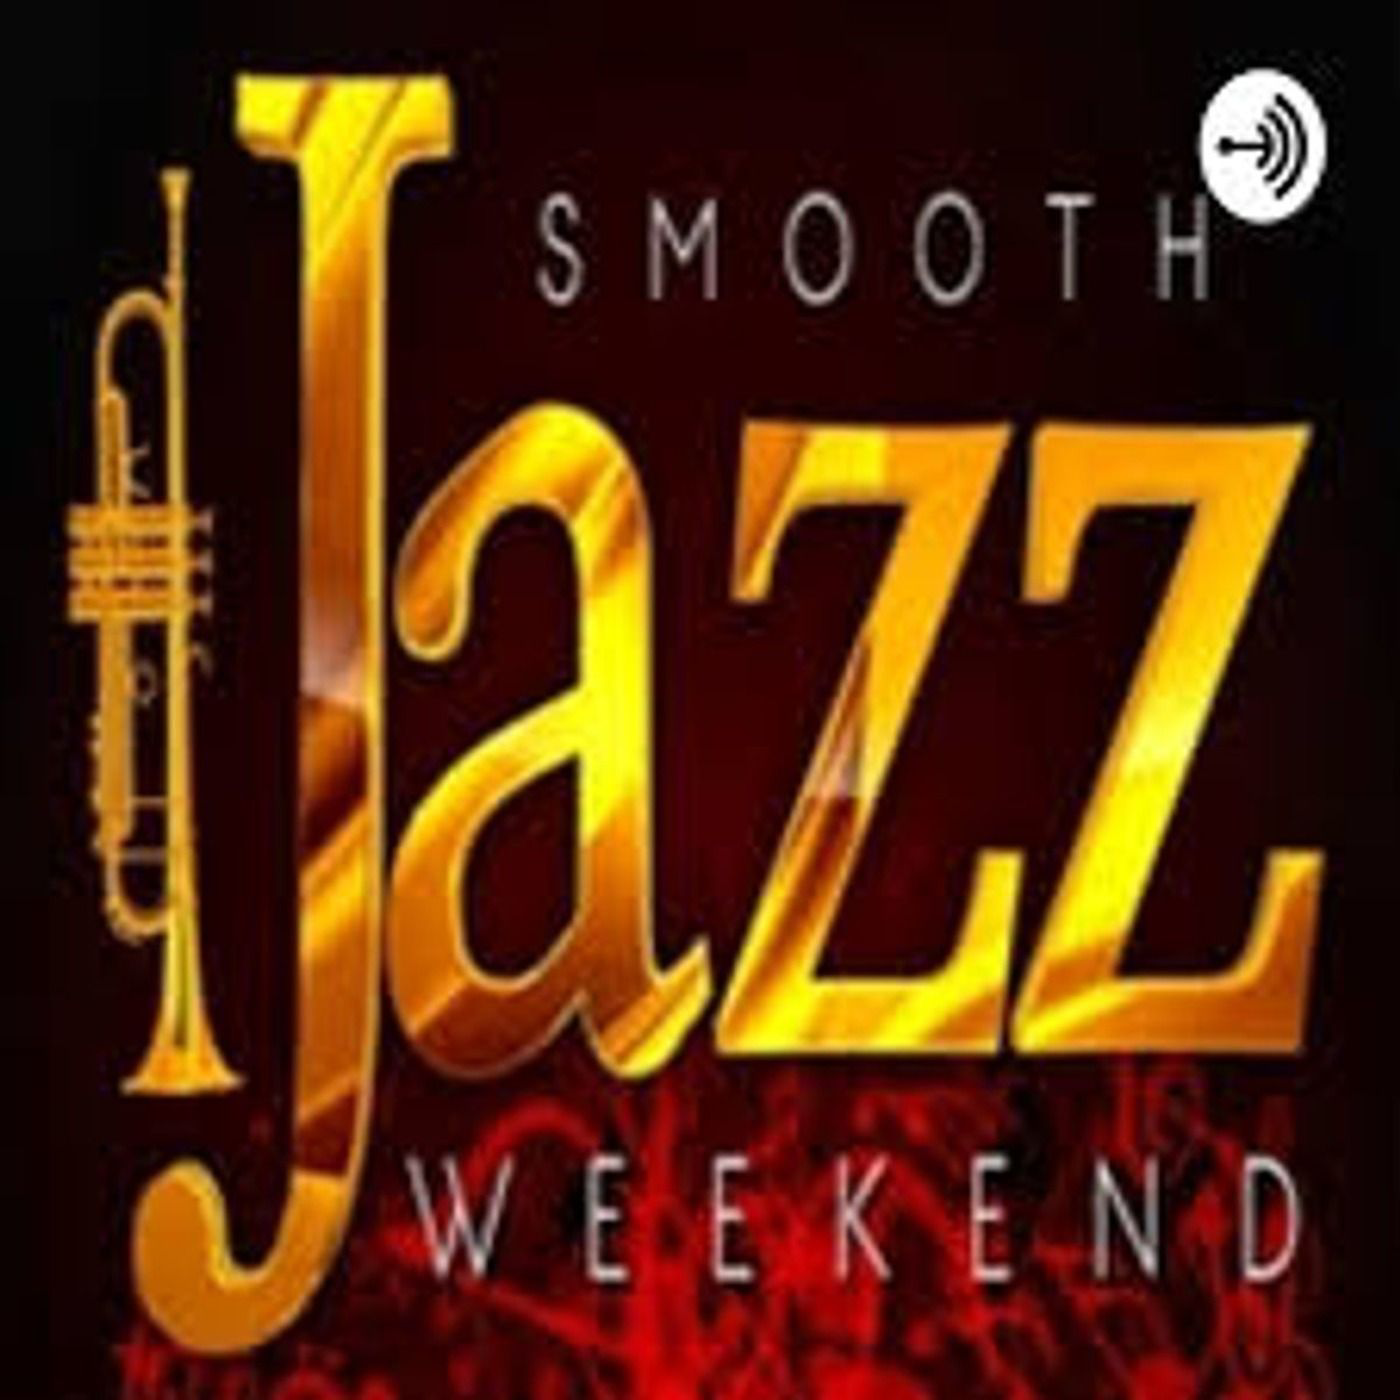 A highlight from Smooth Jazz Weekend with Tina E (Feels So Right)